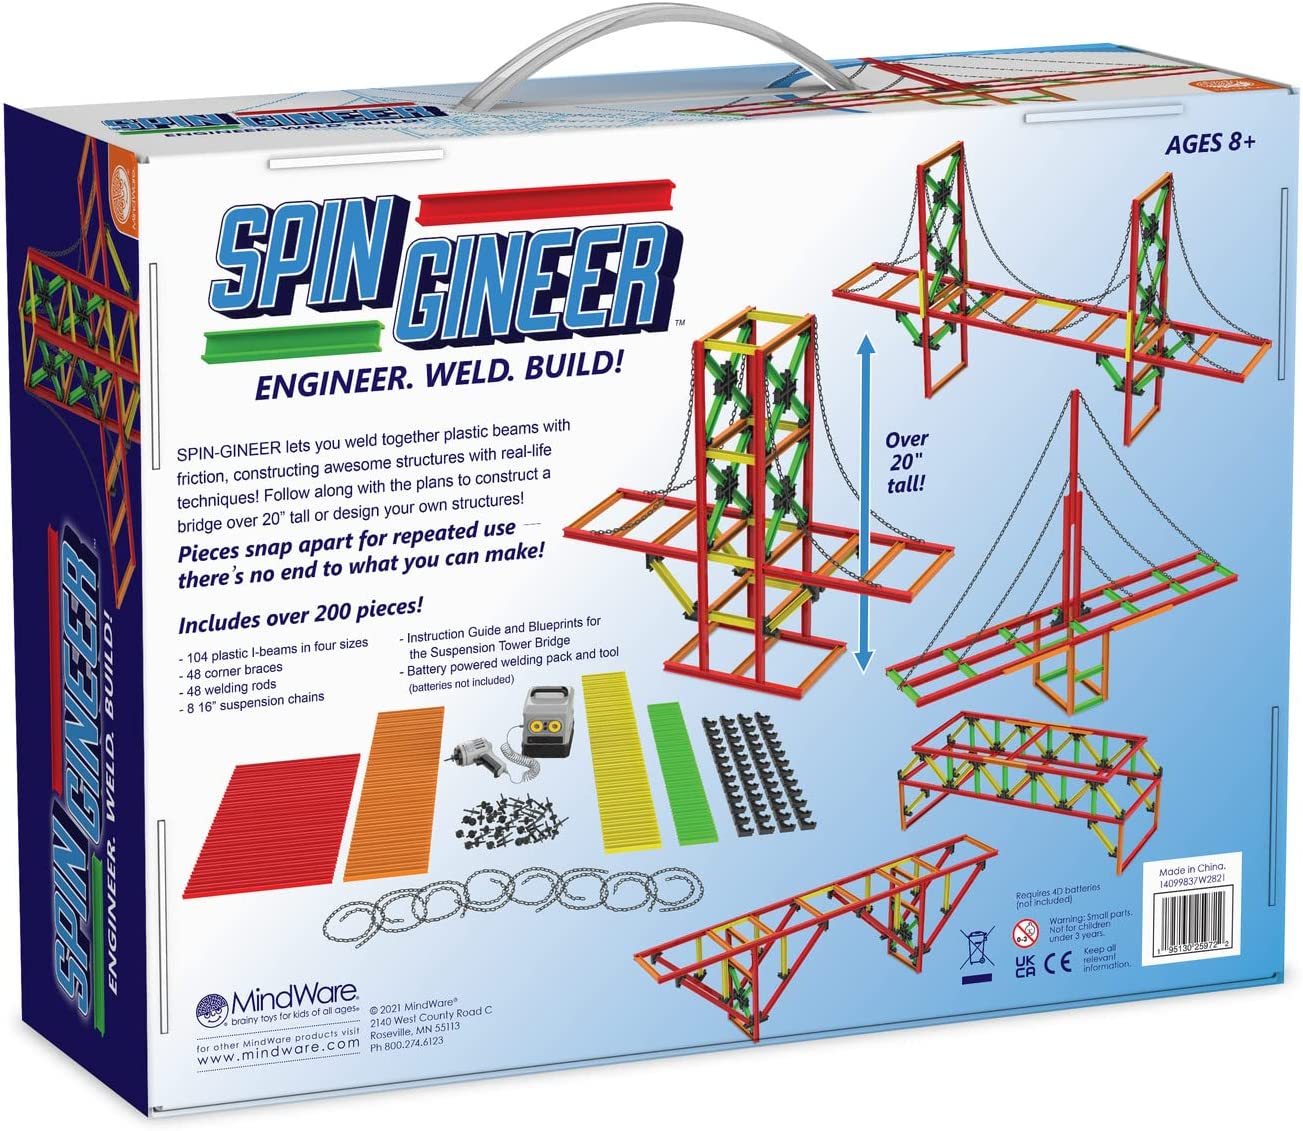 Spin-Gineer: Engineer, Weld, Build by Mindware #99837